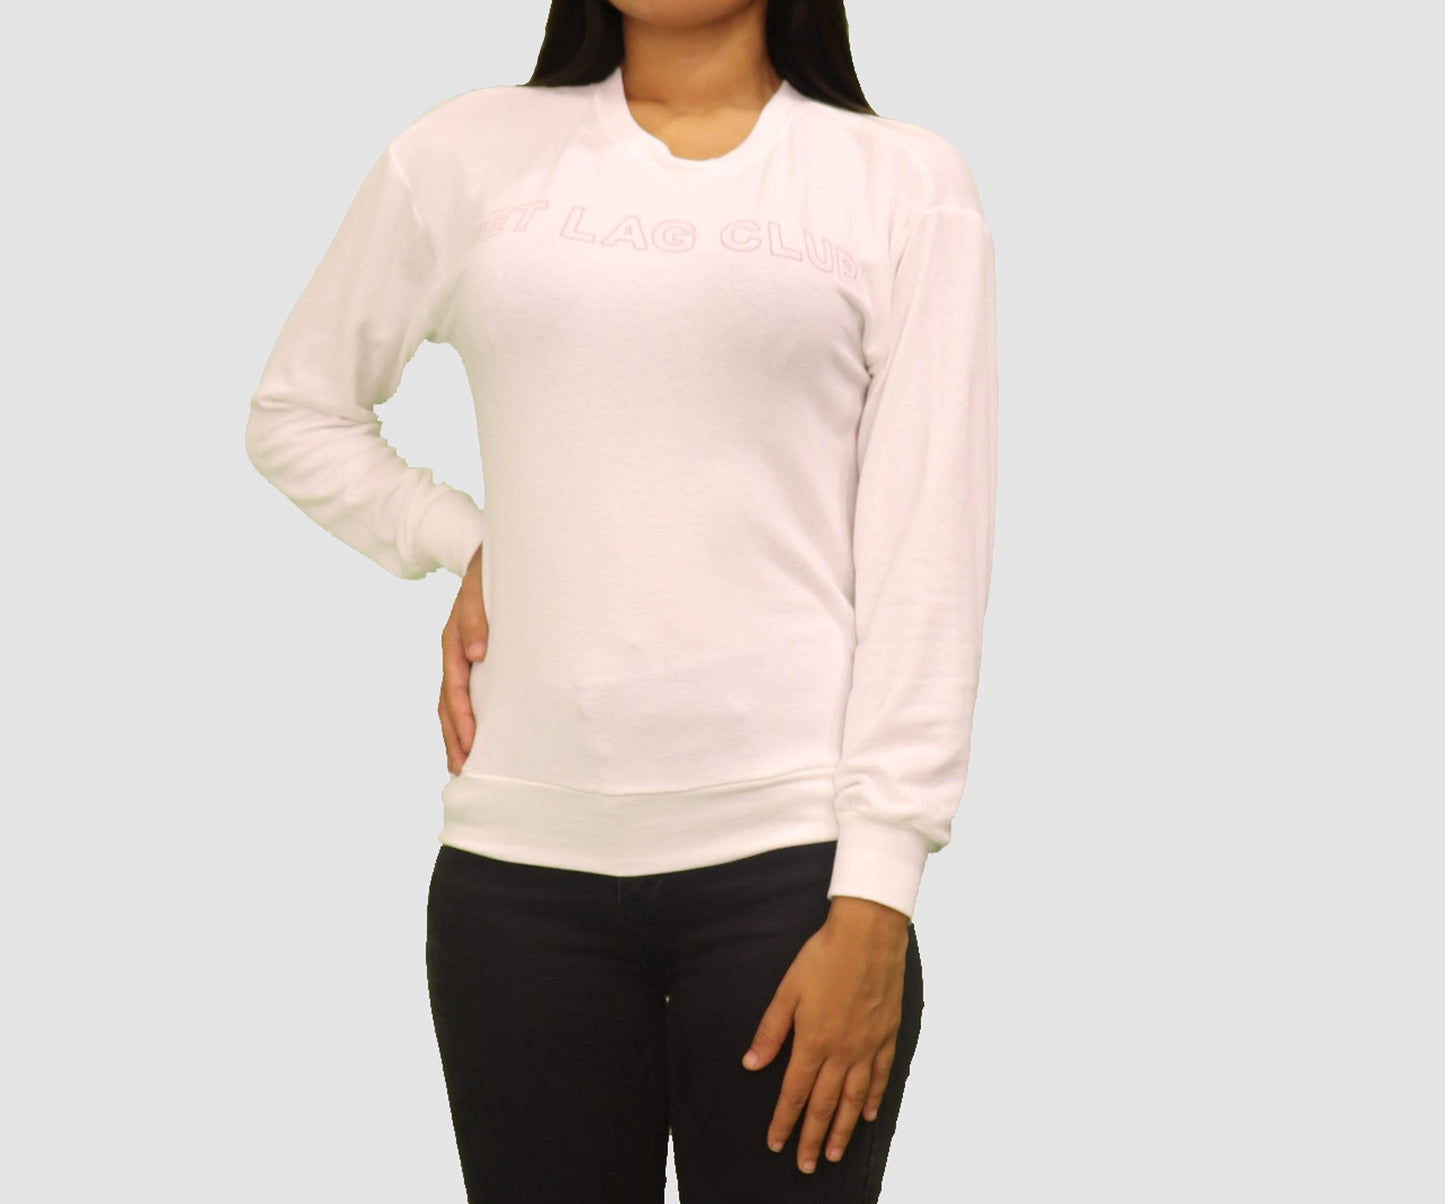 Michelle by Comune Womens Tops Small / White Long Sleeve Top